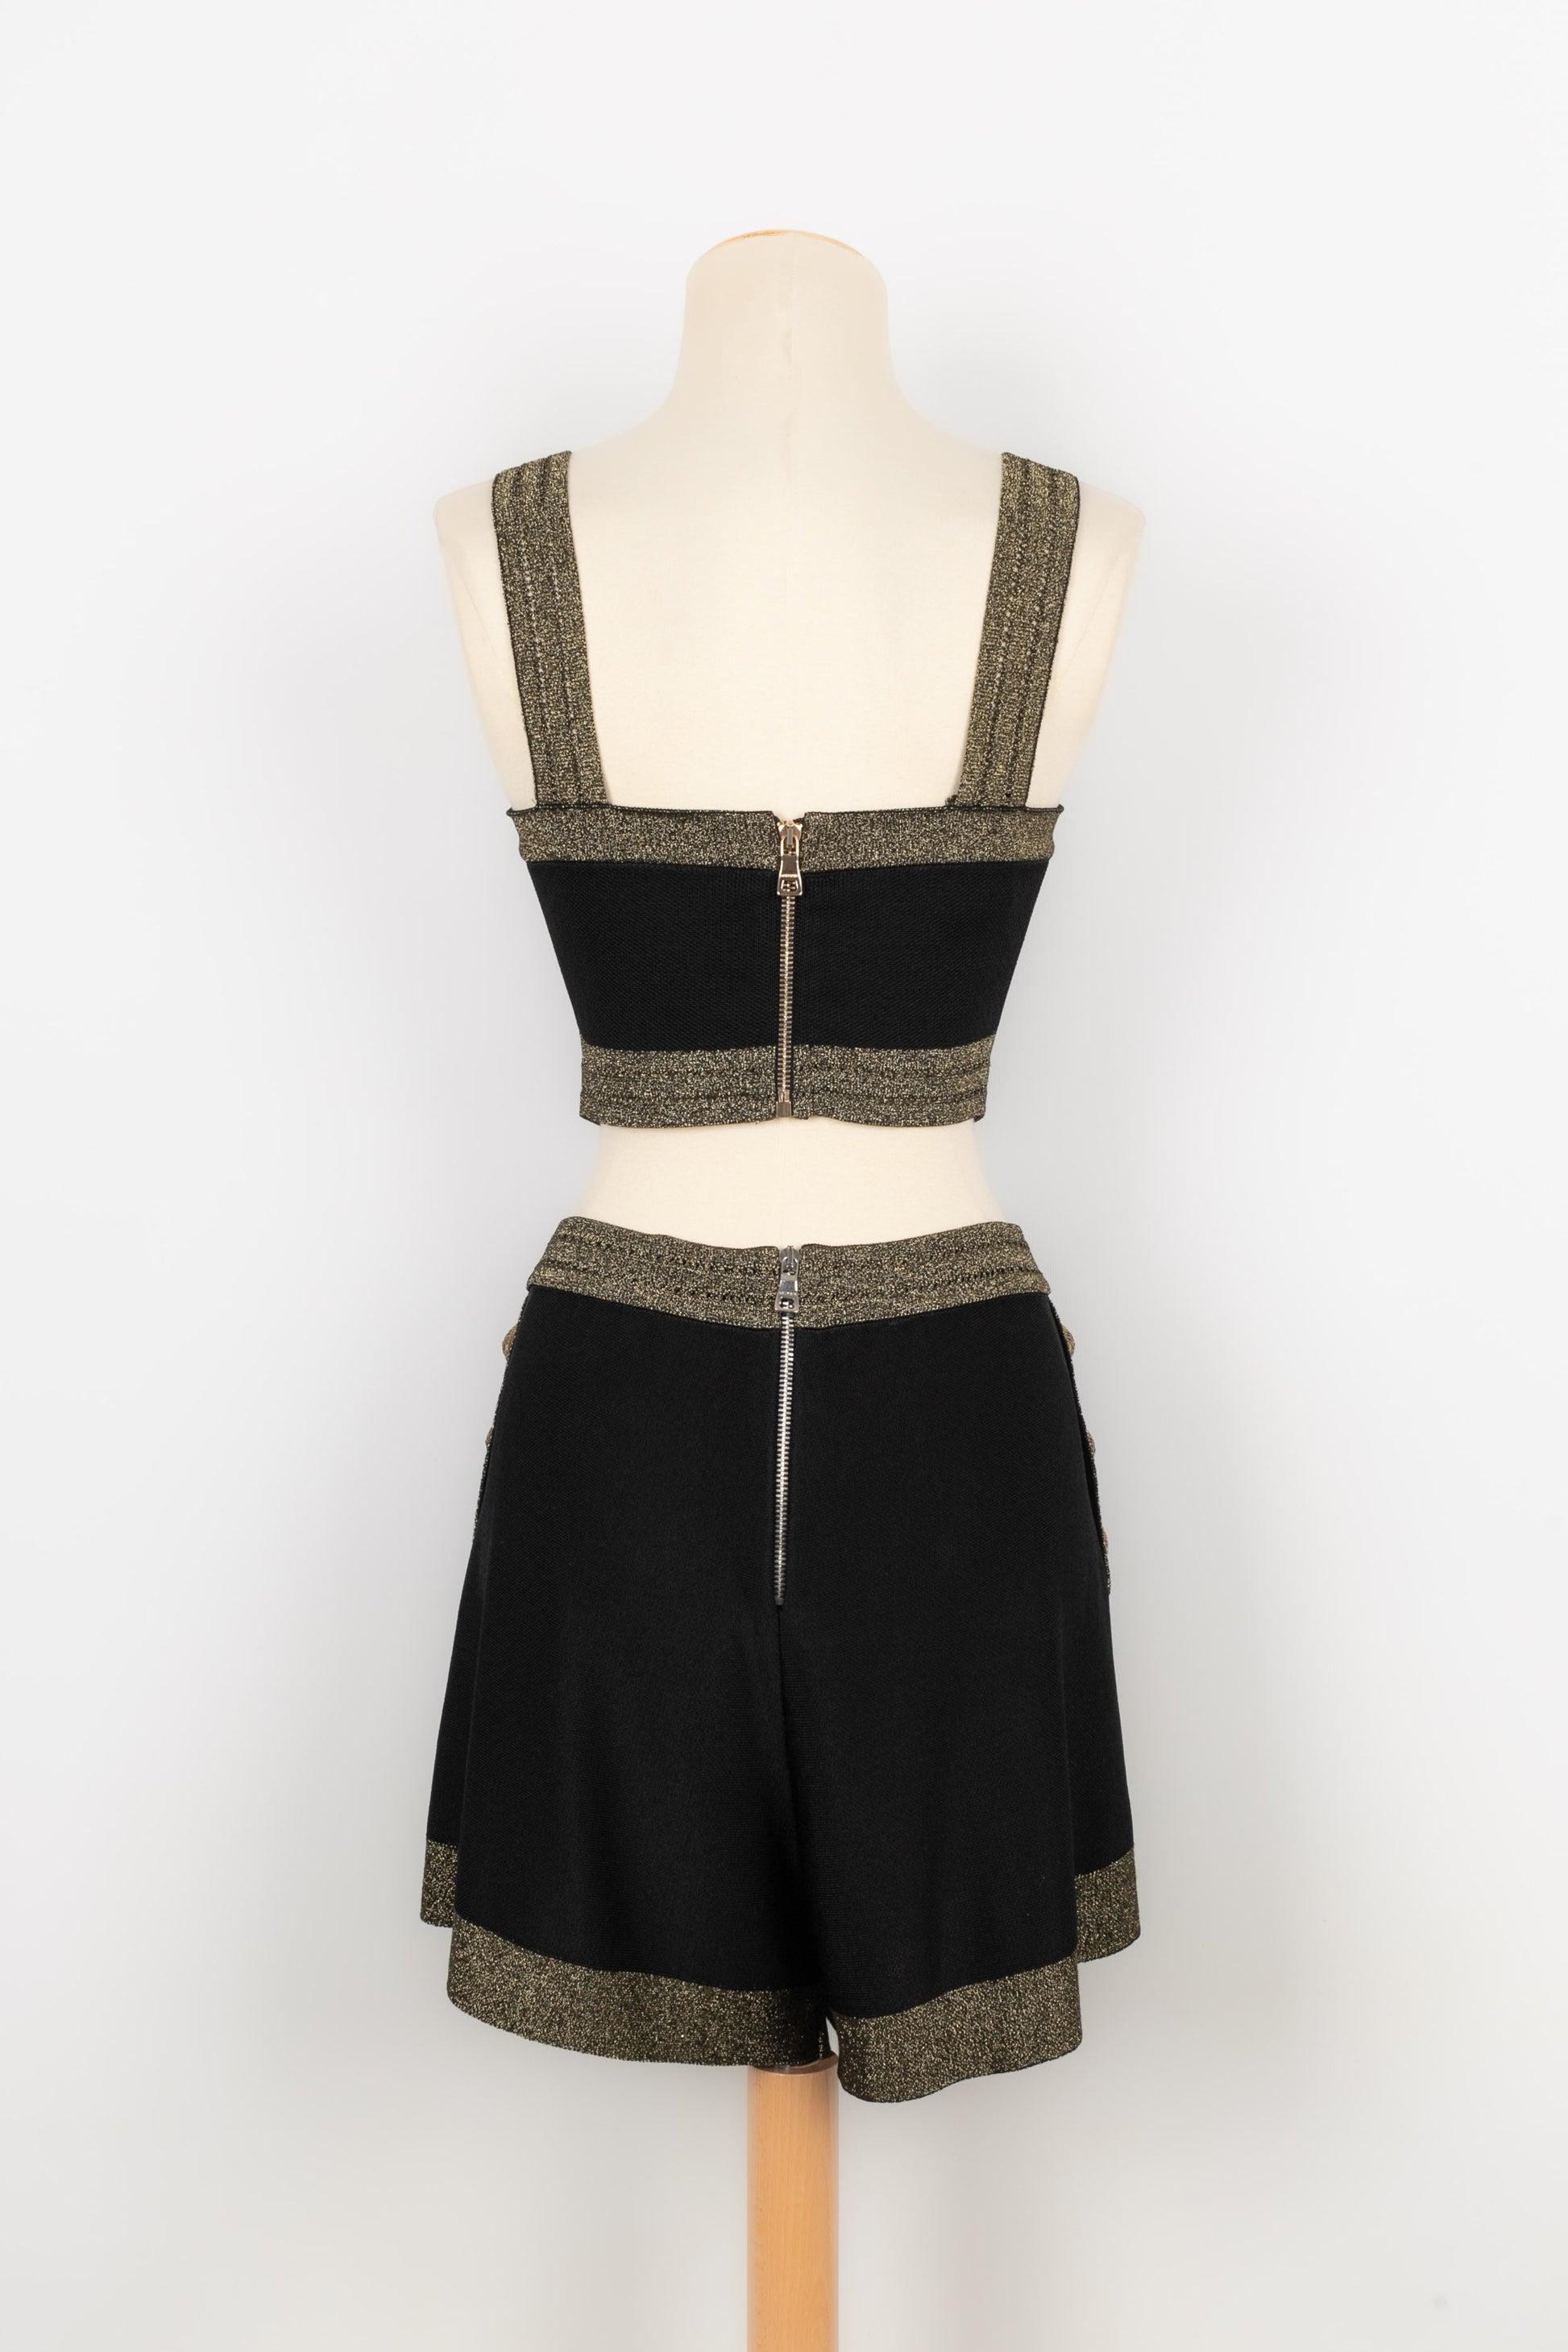 Balmain Set Composed of Shorts and a Black Top Edged with Golden In Excellent Condition For Sale In SAINT-OUEN-SUR-SEINE, FR